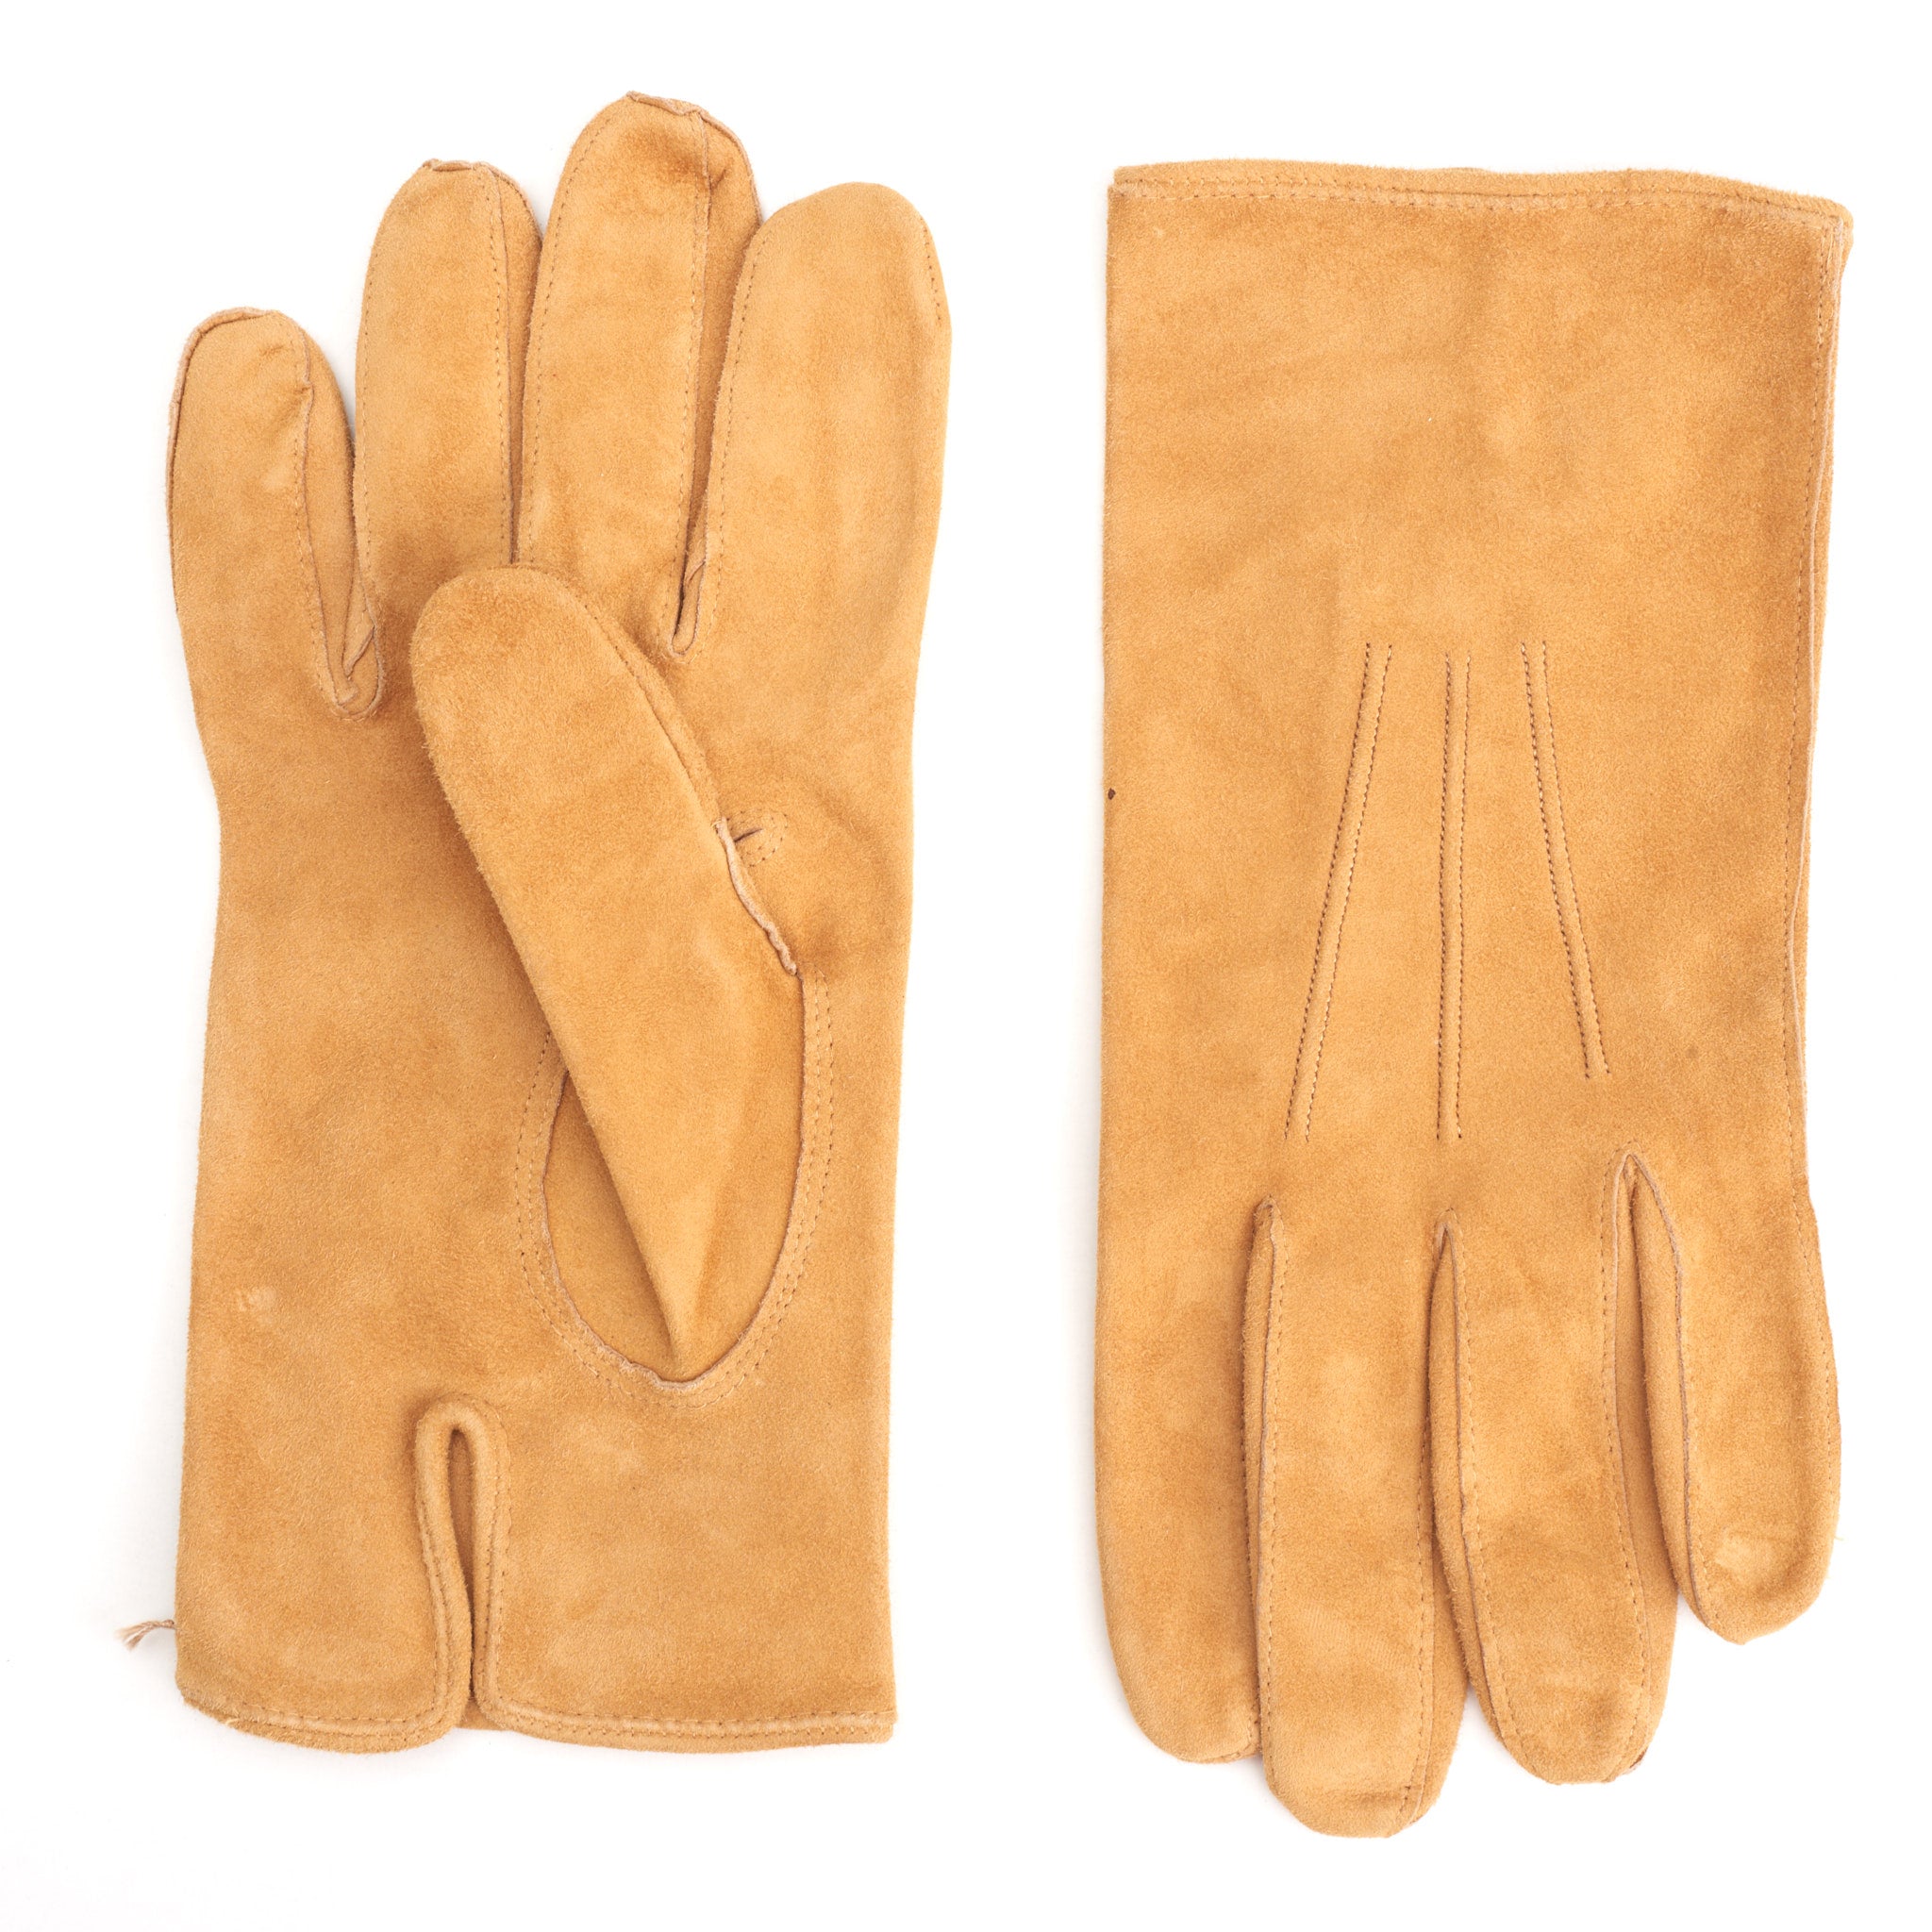 SERMONETA Tan Suede Nappa Leather Unlined Classic Gloves Size 8 WOMEN'S BOUTIQUE